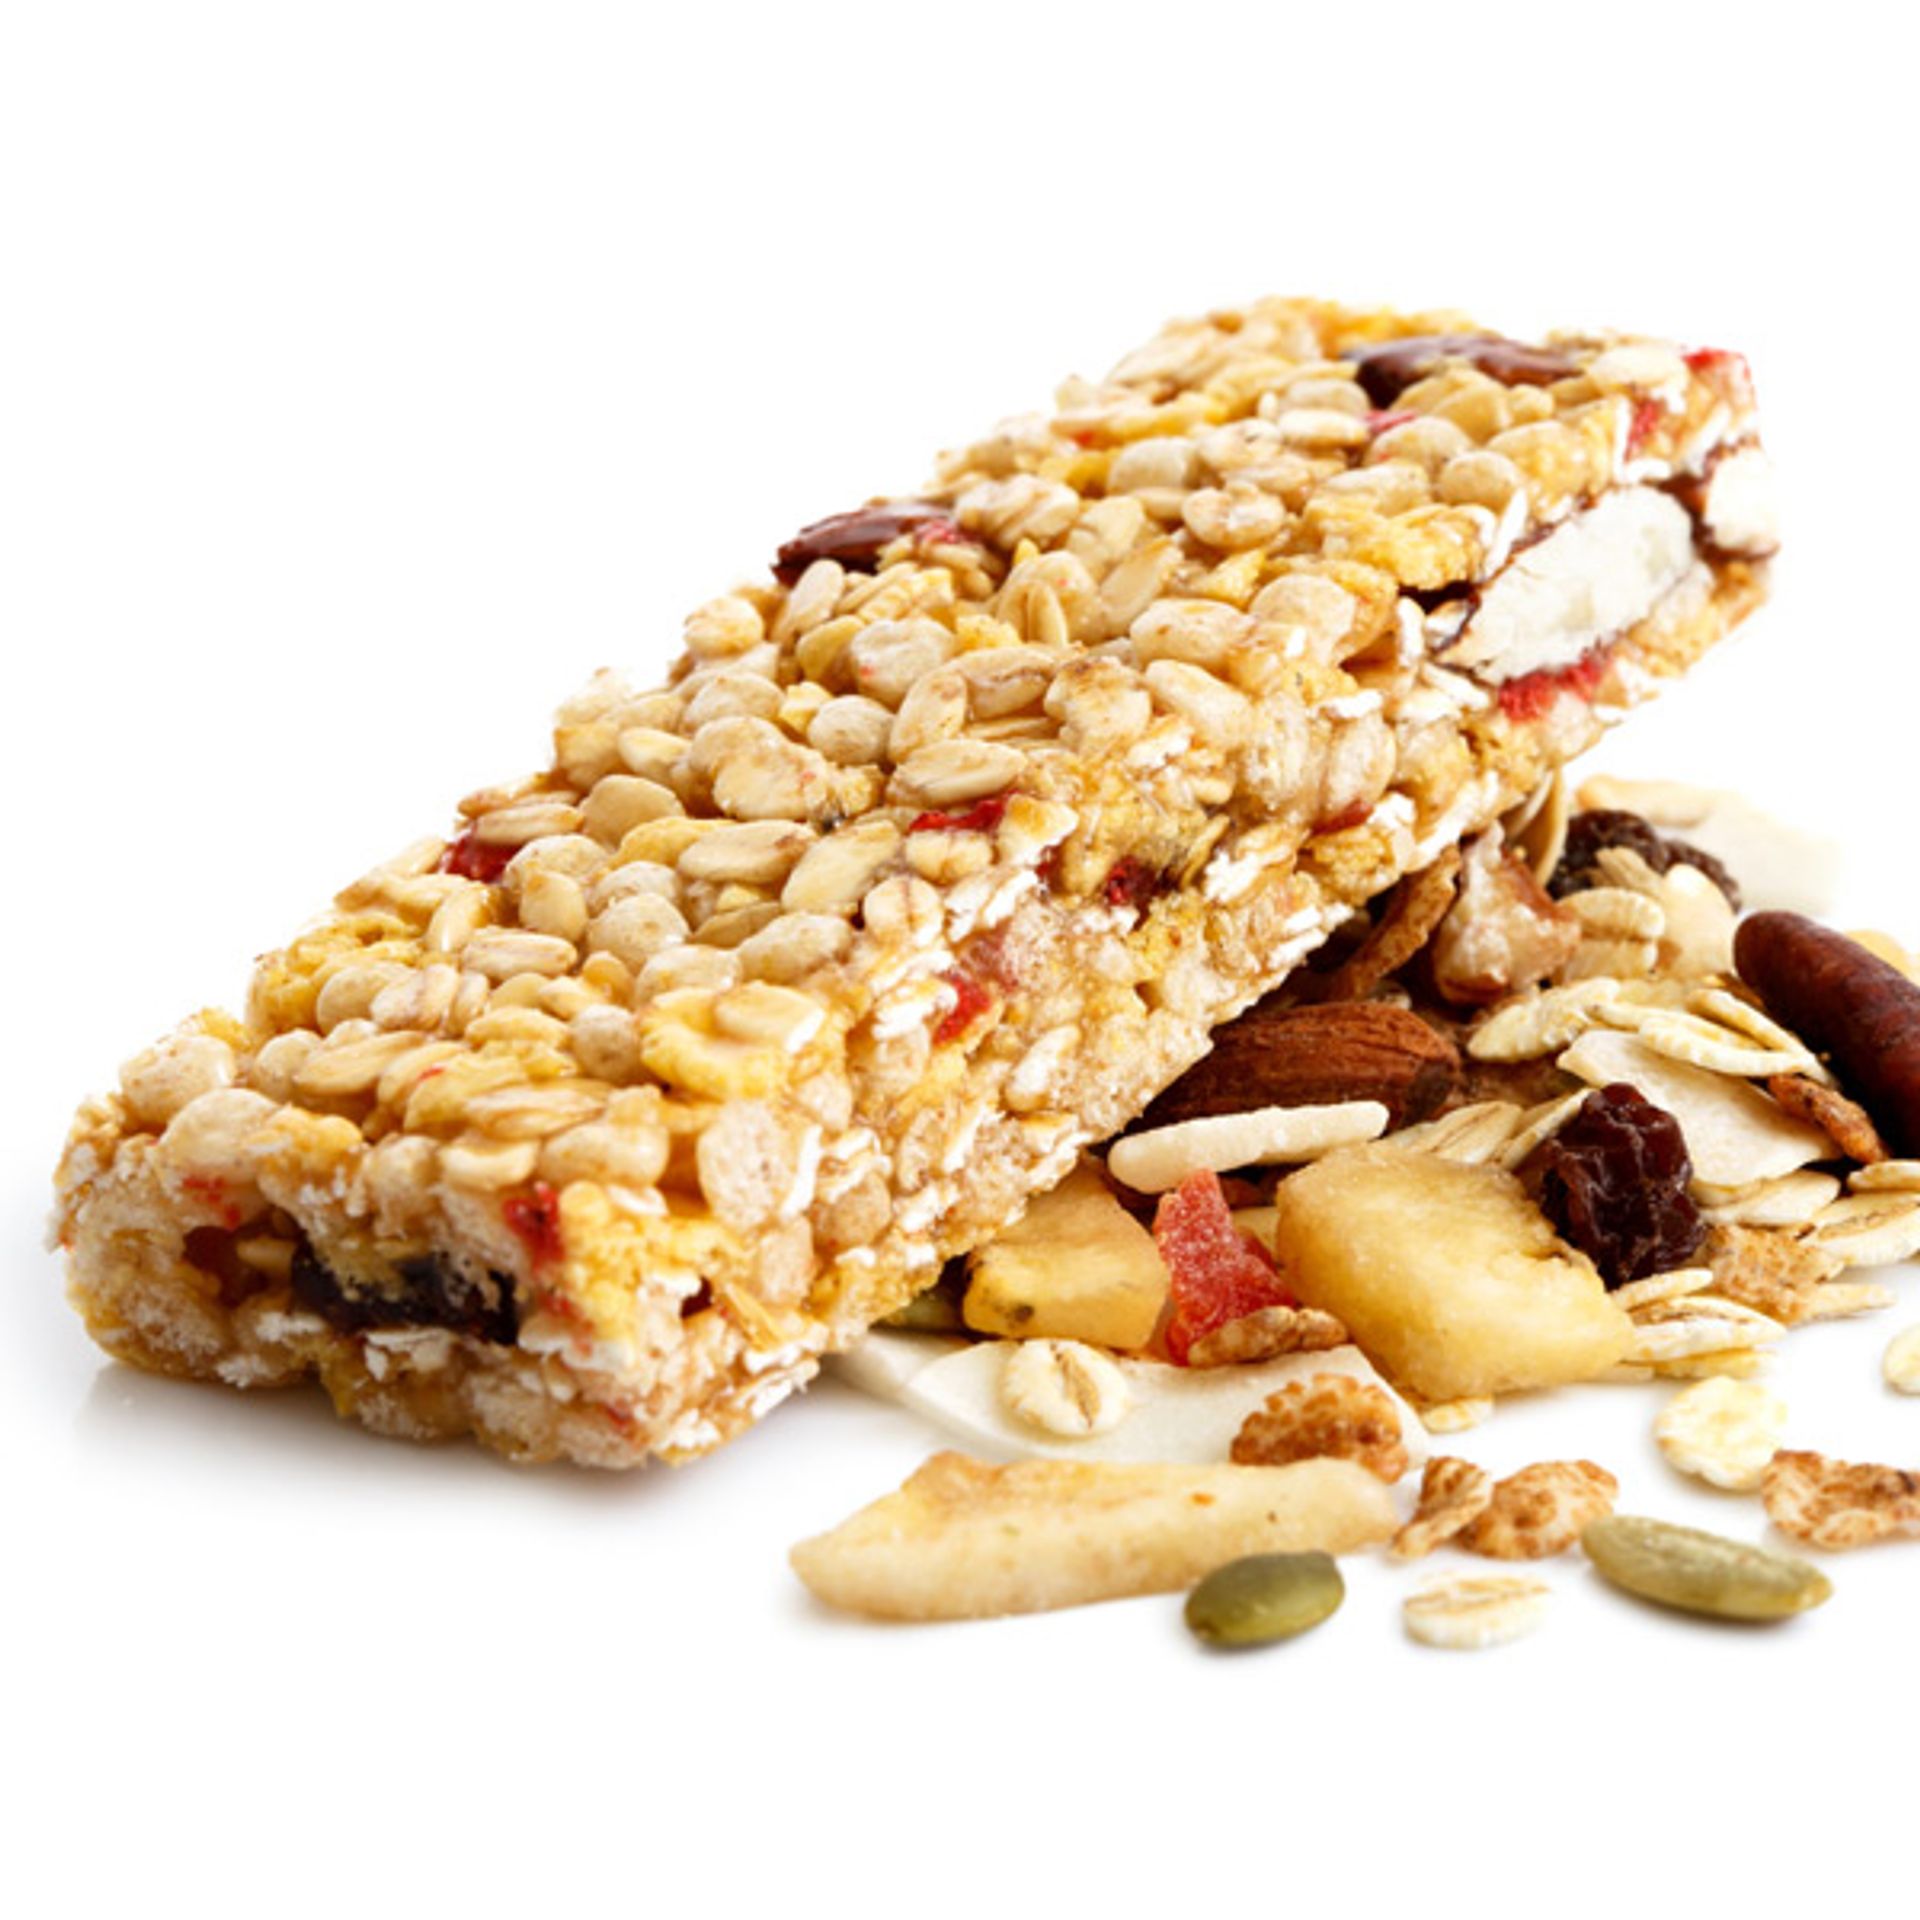 Example of Fruit, Nut & Seed Bar